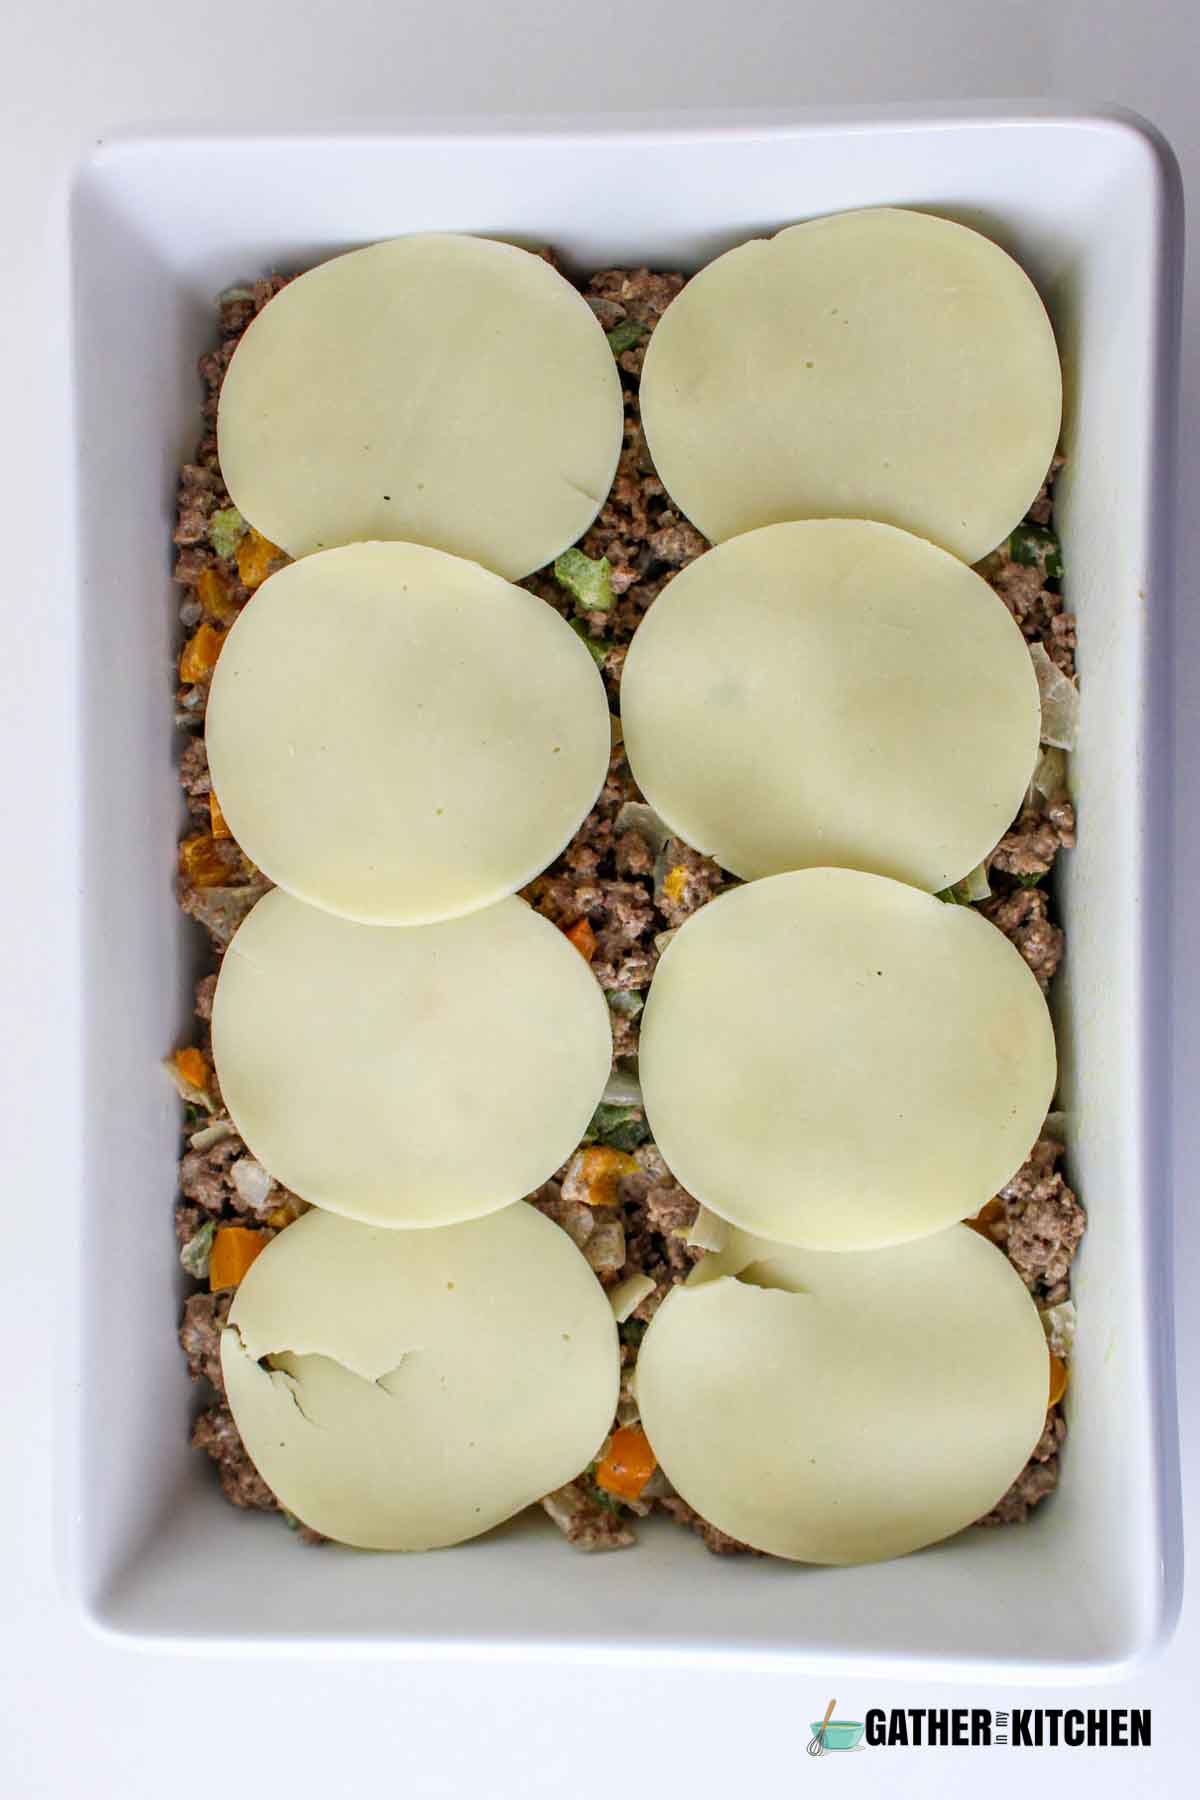 Slices of provolone cheese over beef and veggie mix.